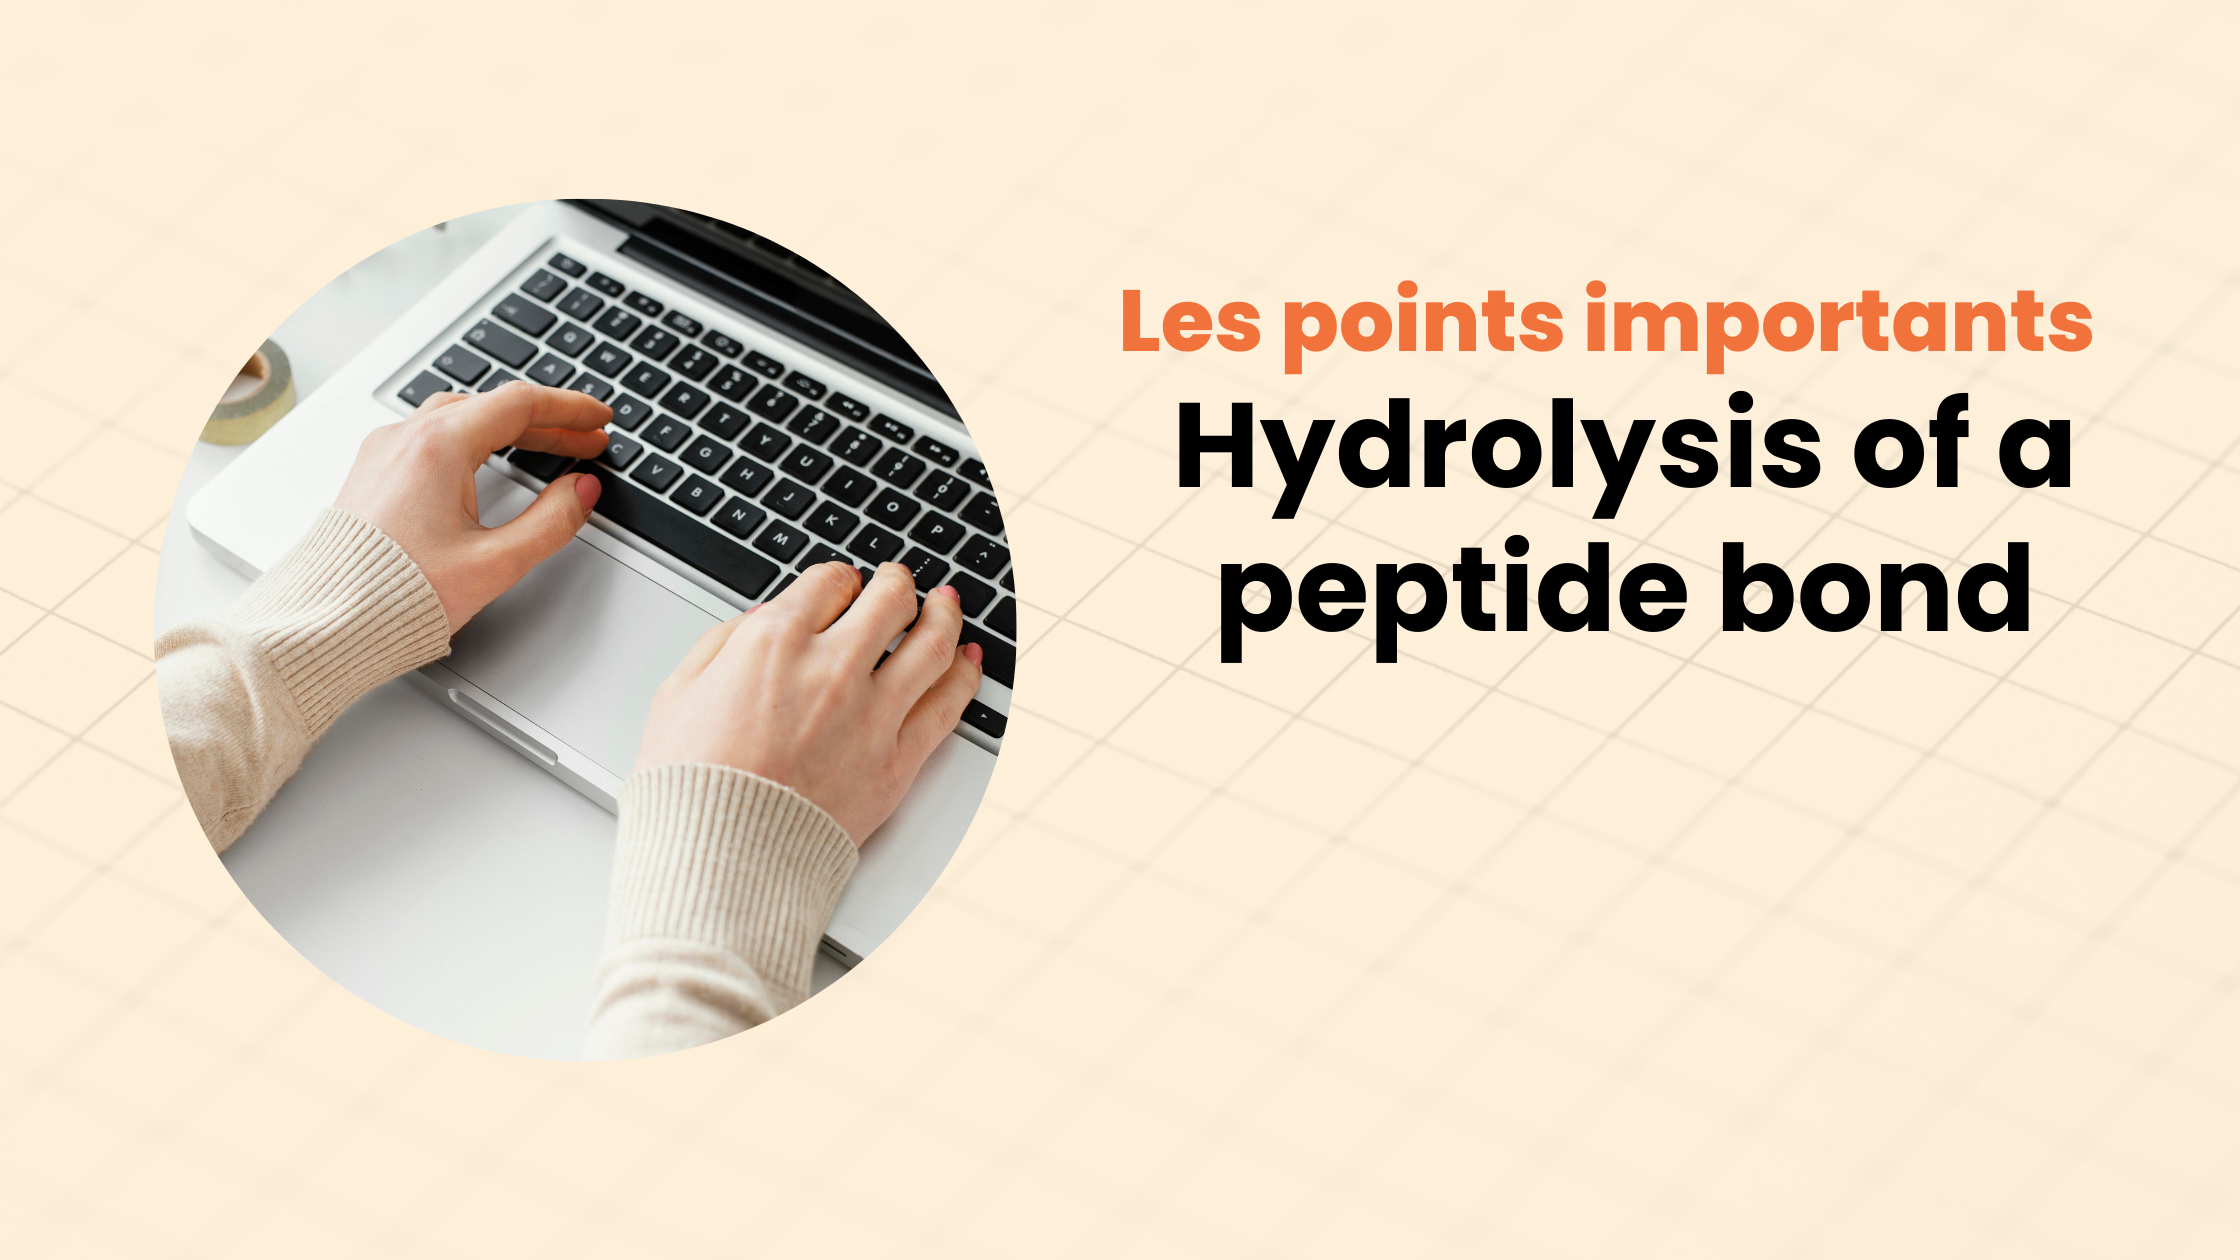 Hydrolysis of a peptide bond | Les points importants